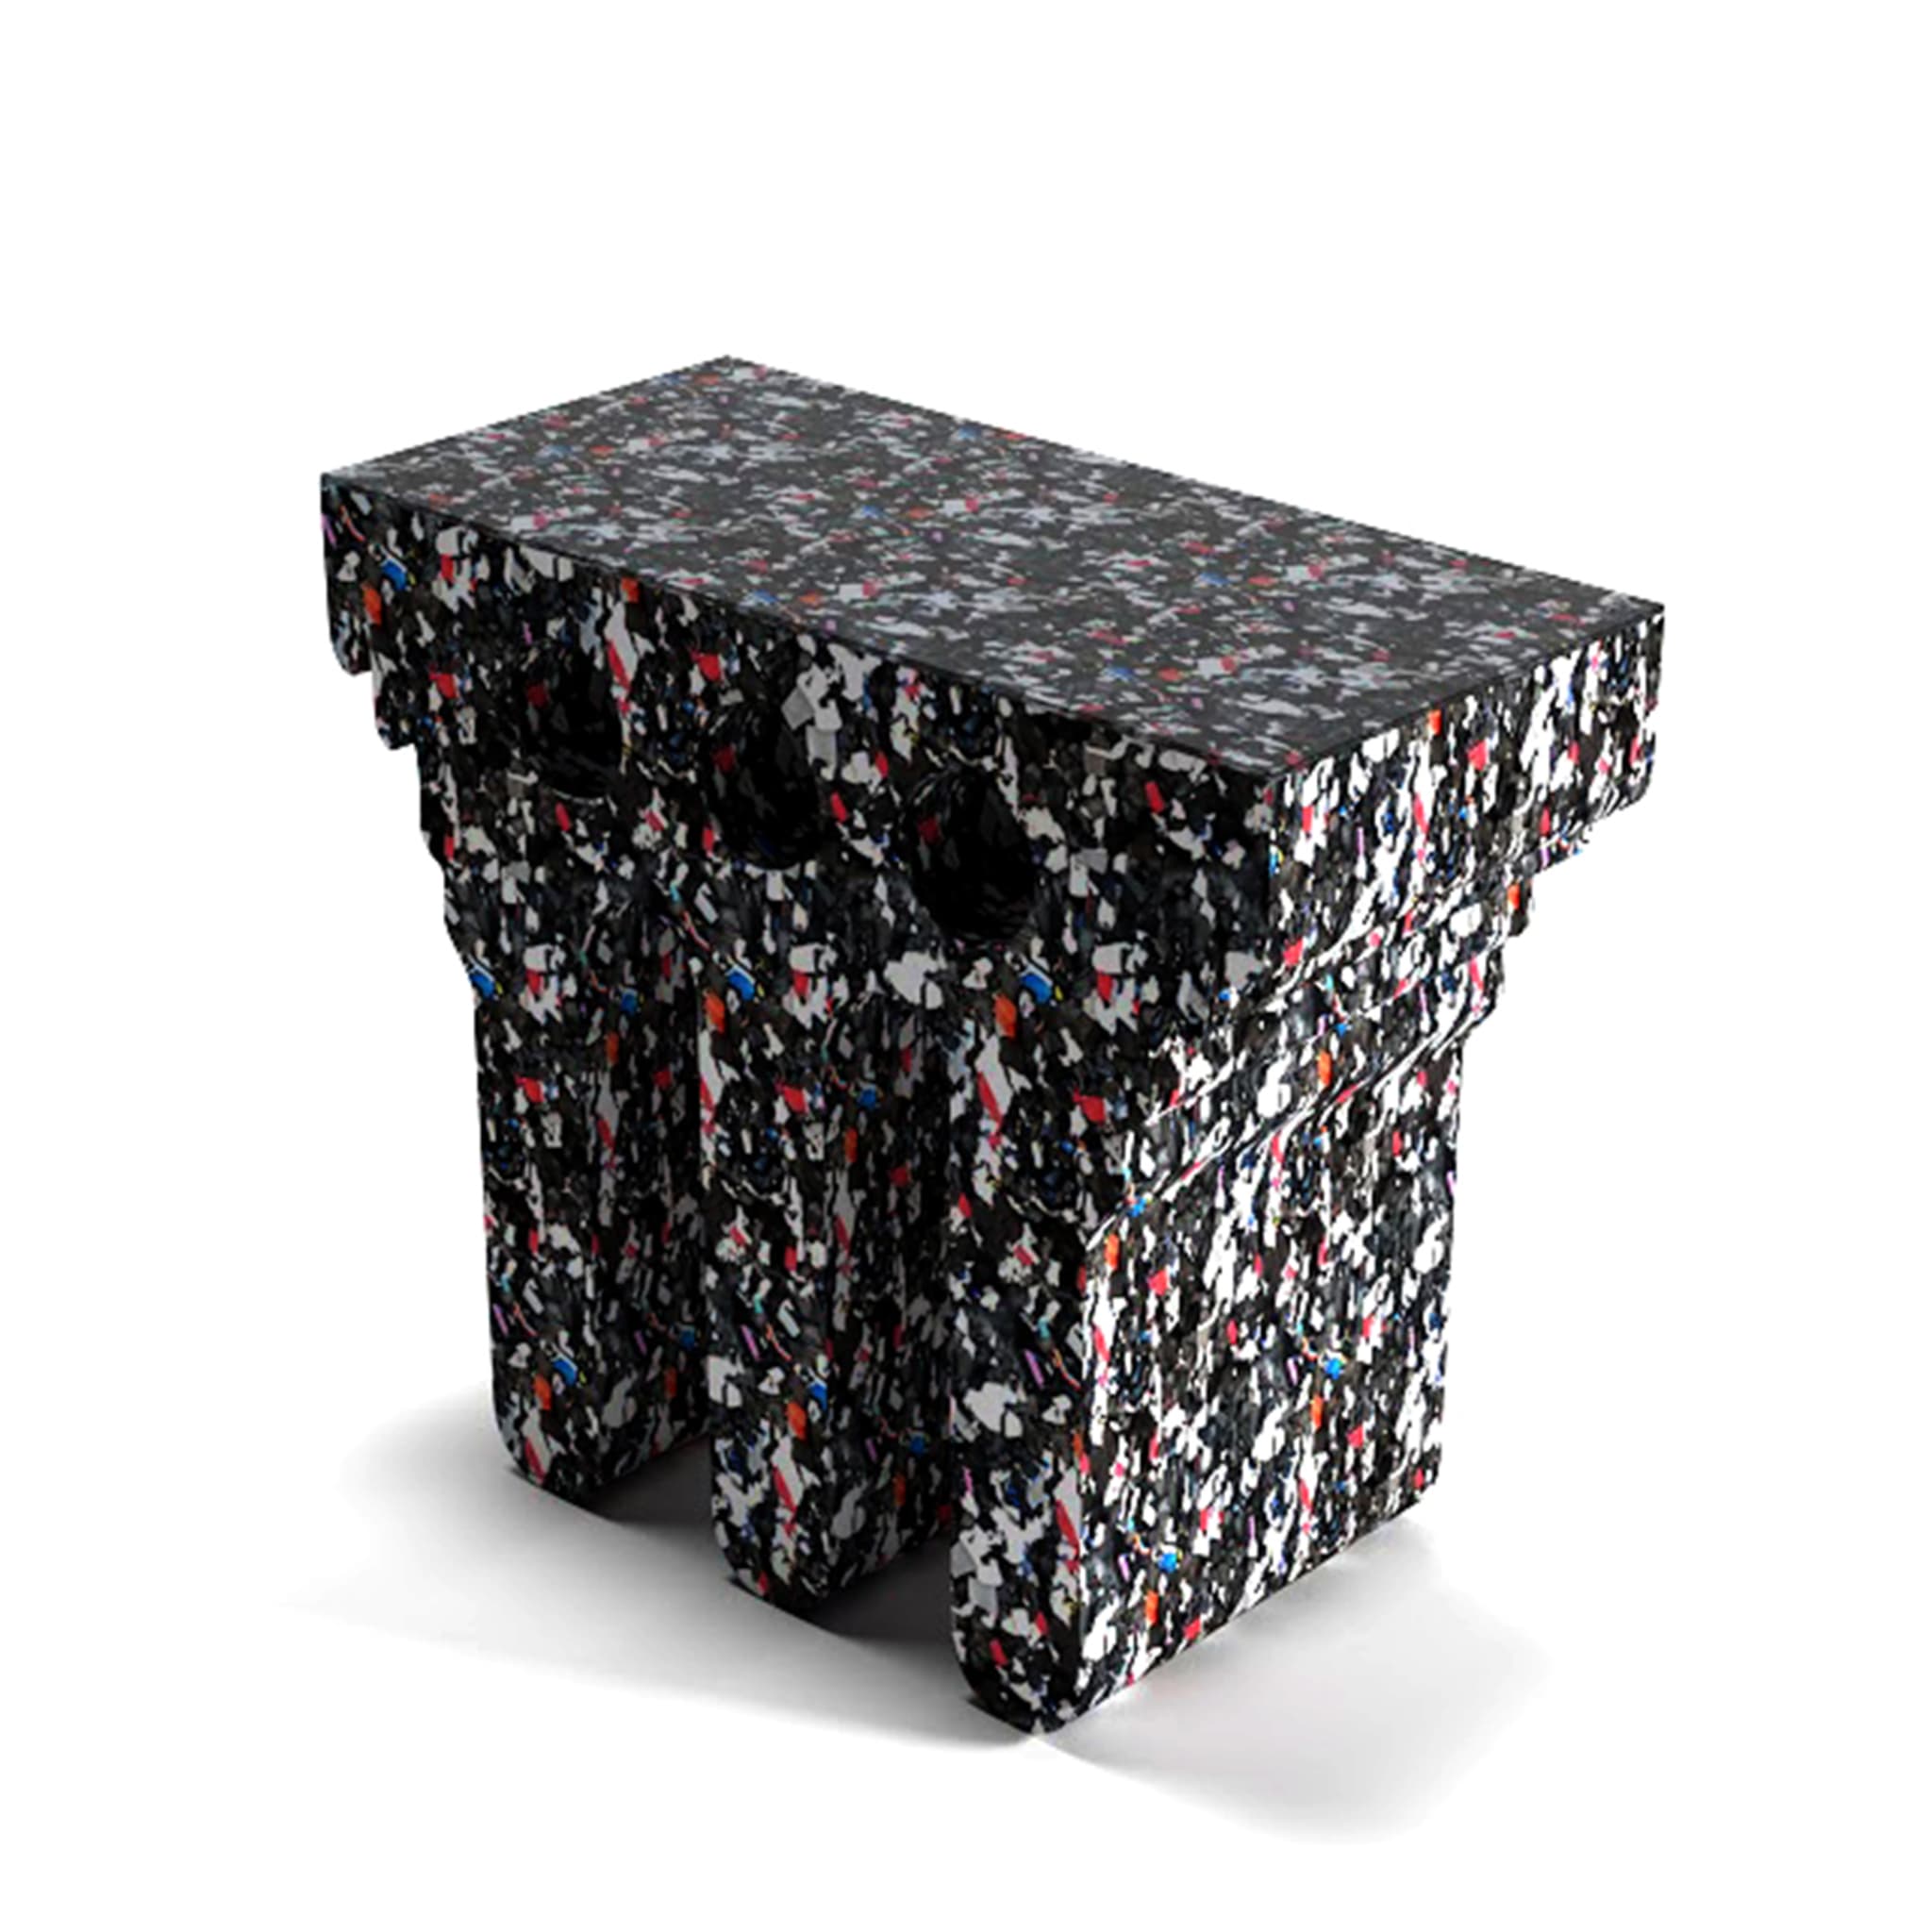 Sphinx Black Recycled Console By Clemence Seilles - Alternative view 1